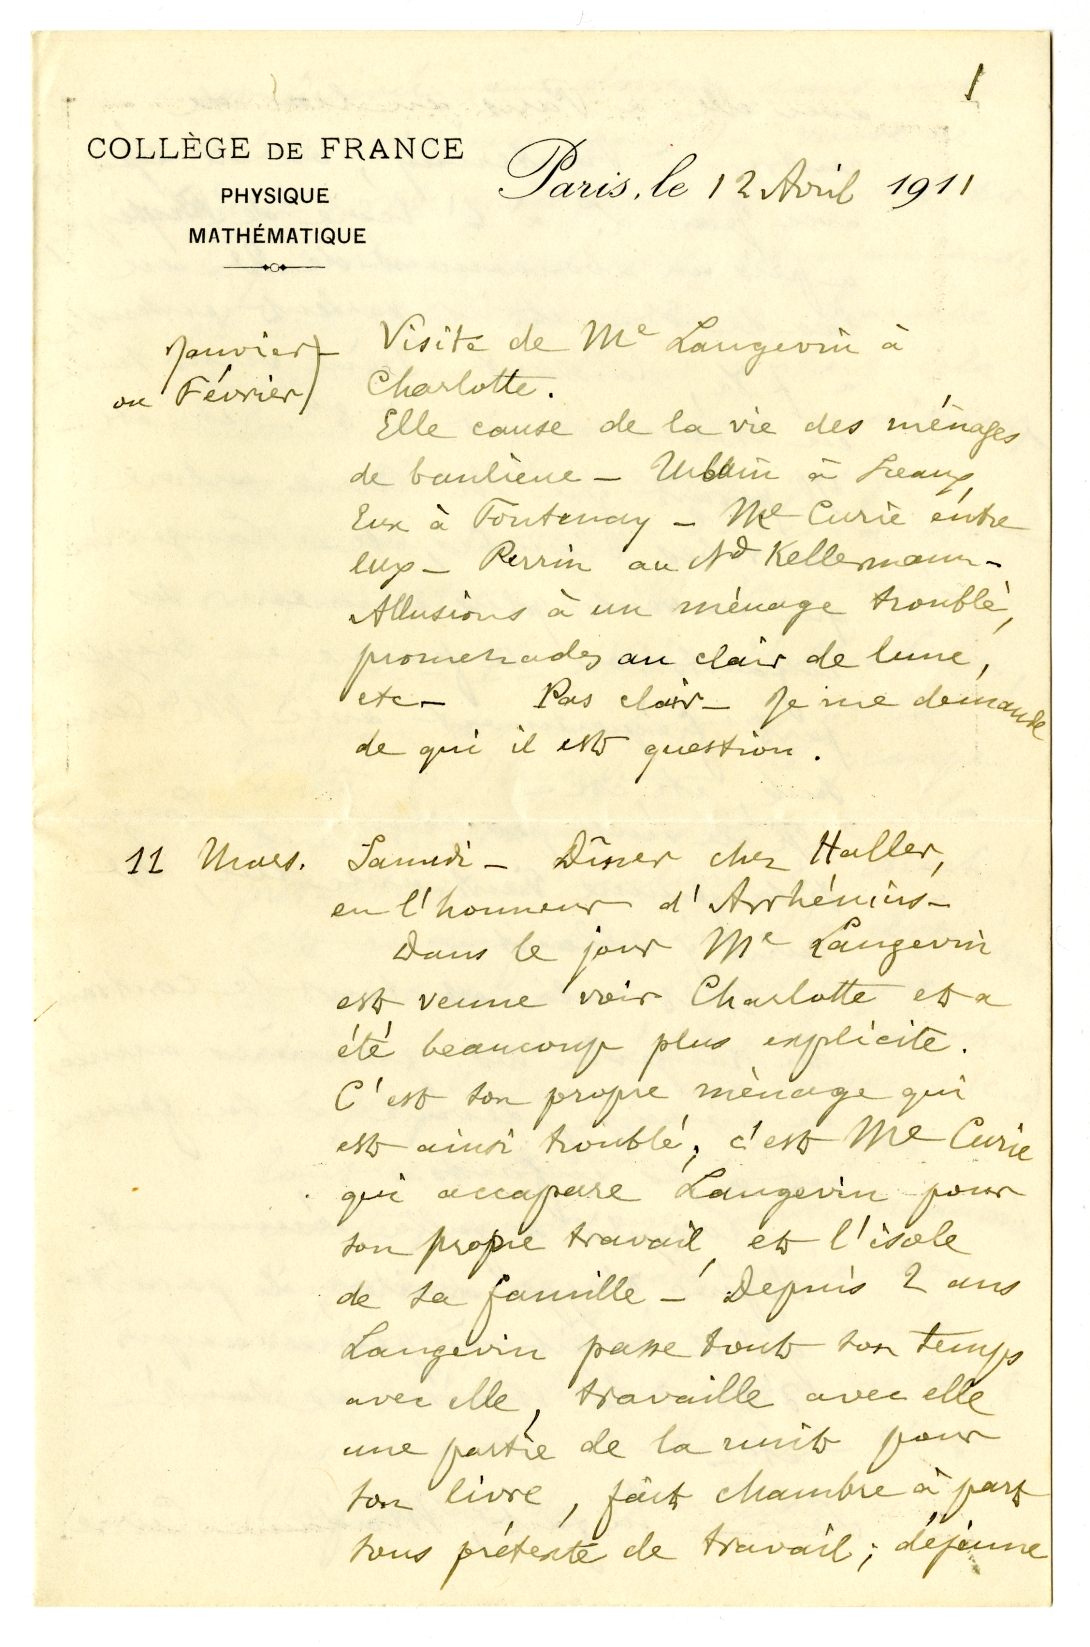 A journal page from the Papers of Léon Brillouin